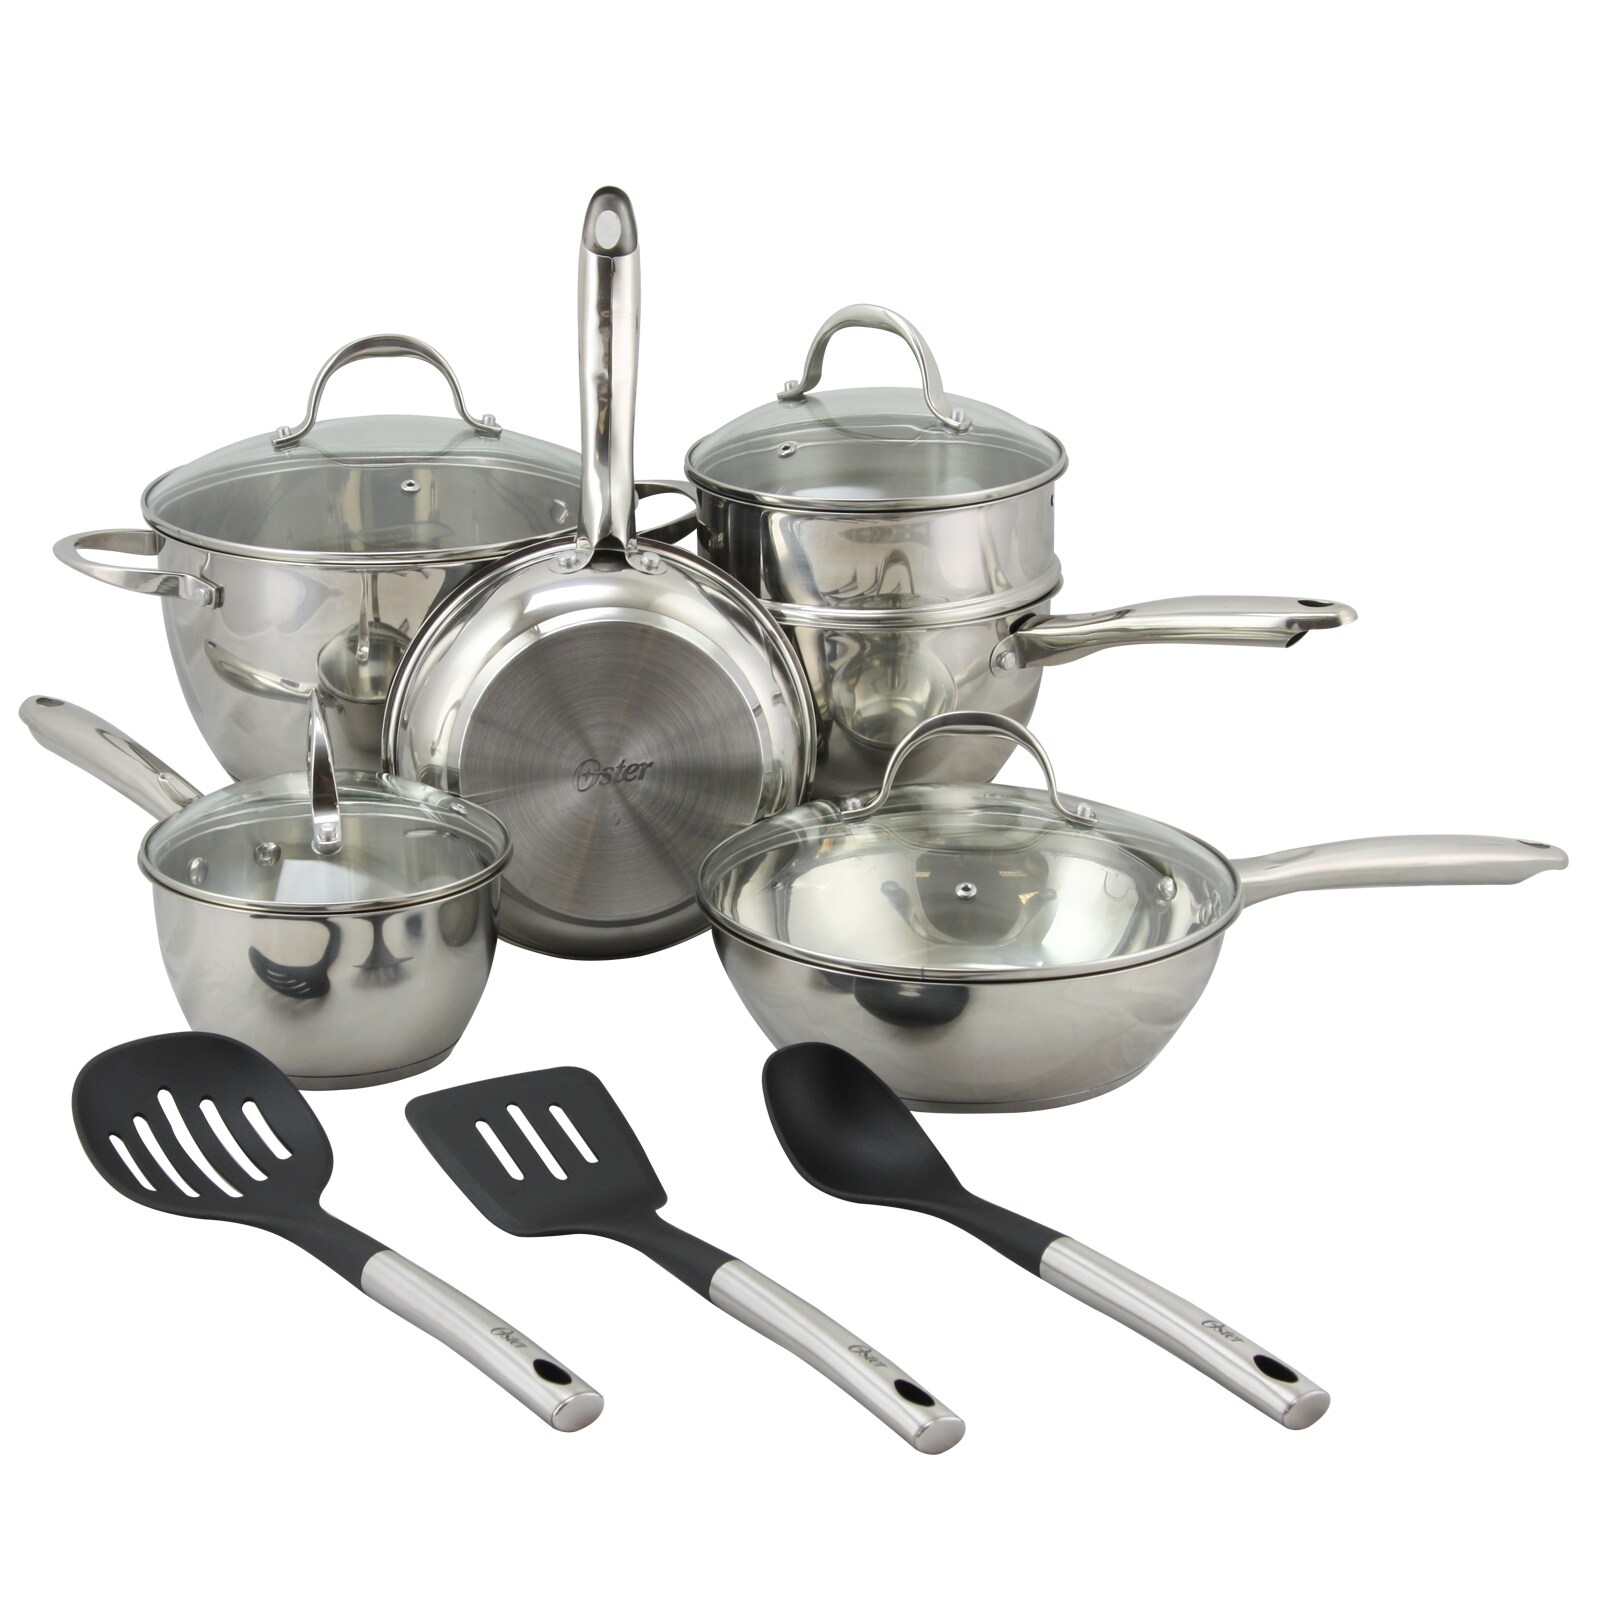 13 piece Stainless Steel Belly Shape Cookware Set in Silver Mirror Polish with Hollow Handle